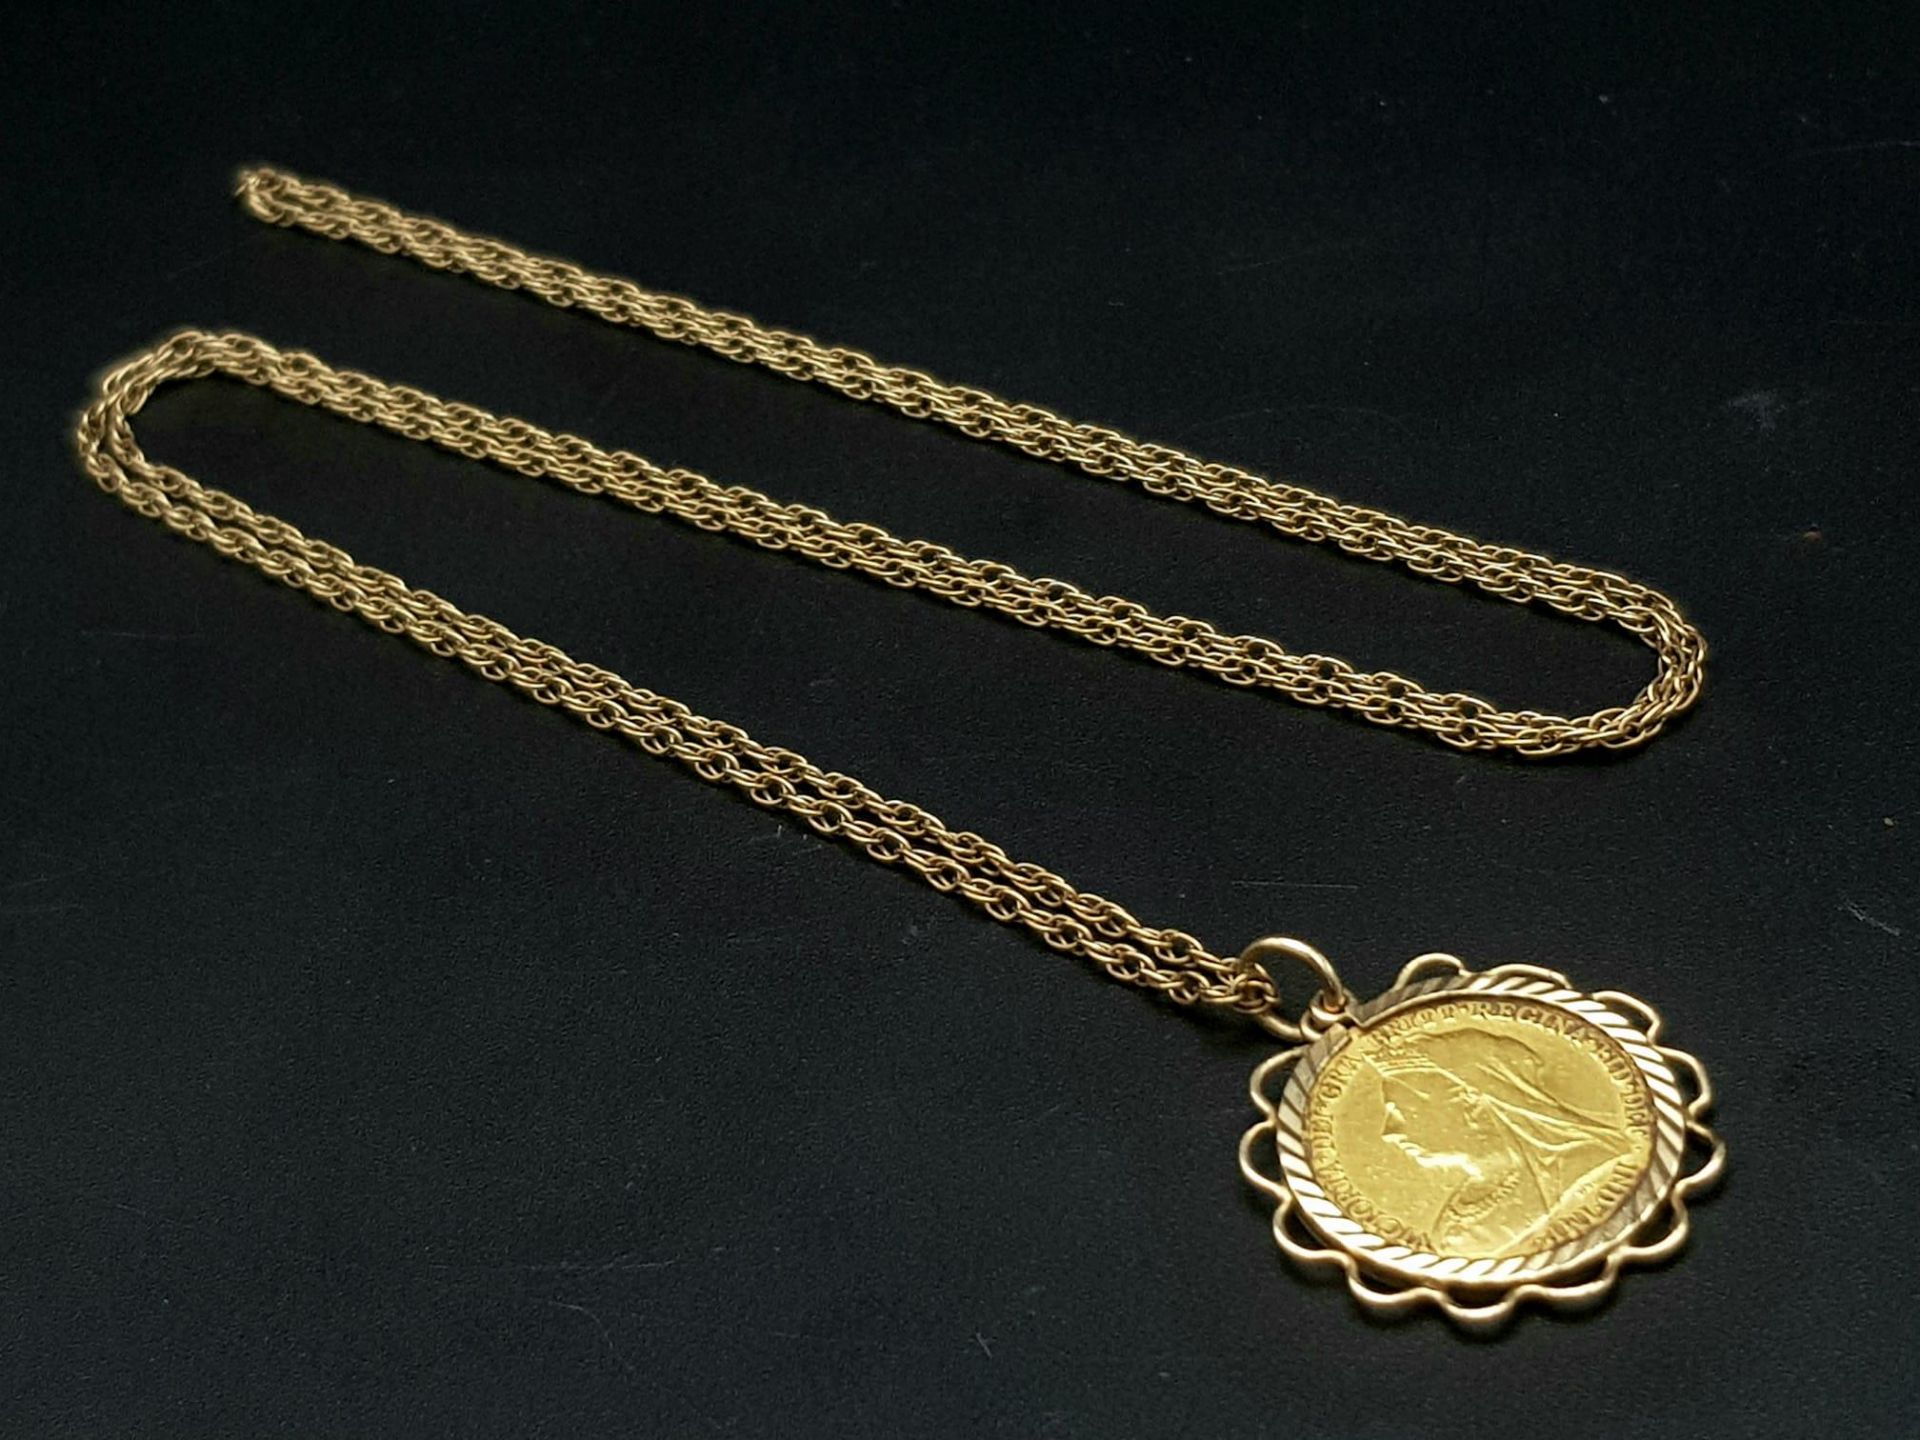 A 1900 22k Gold Queen Victoria Half Sovereign set in a 9K Gold Casing on a 9K Yellow Gold Chain - - Image 2 of 6